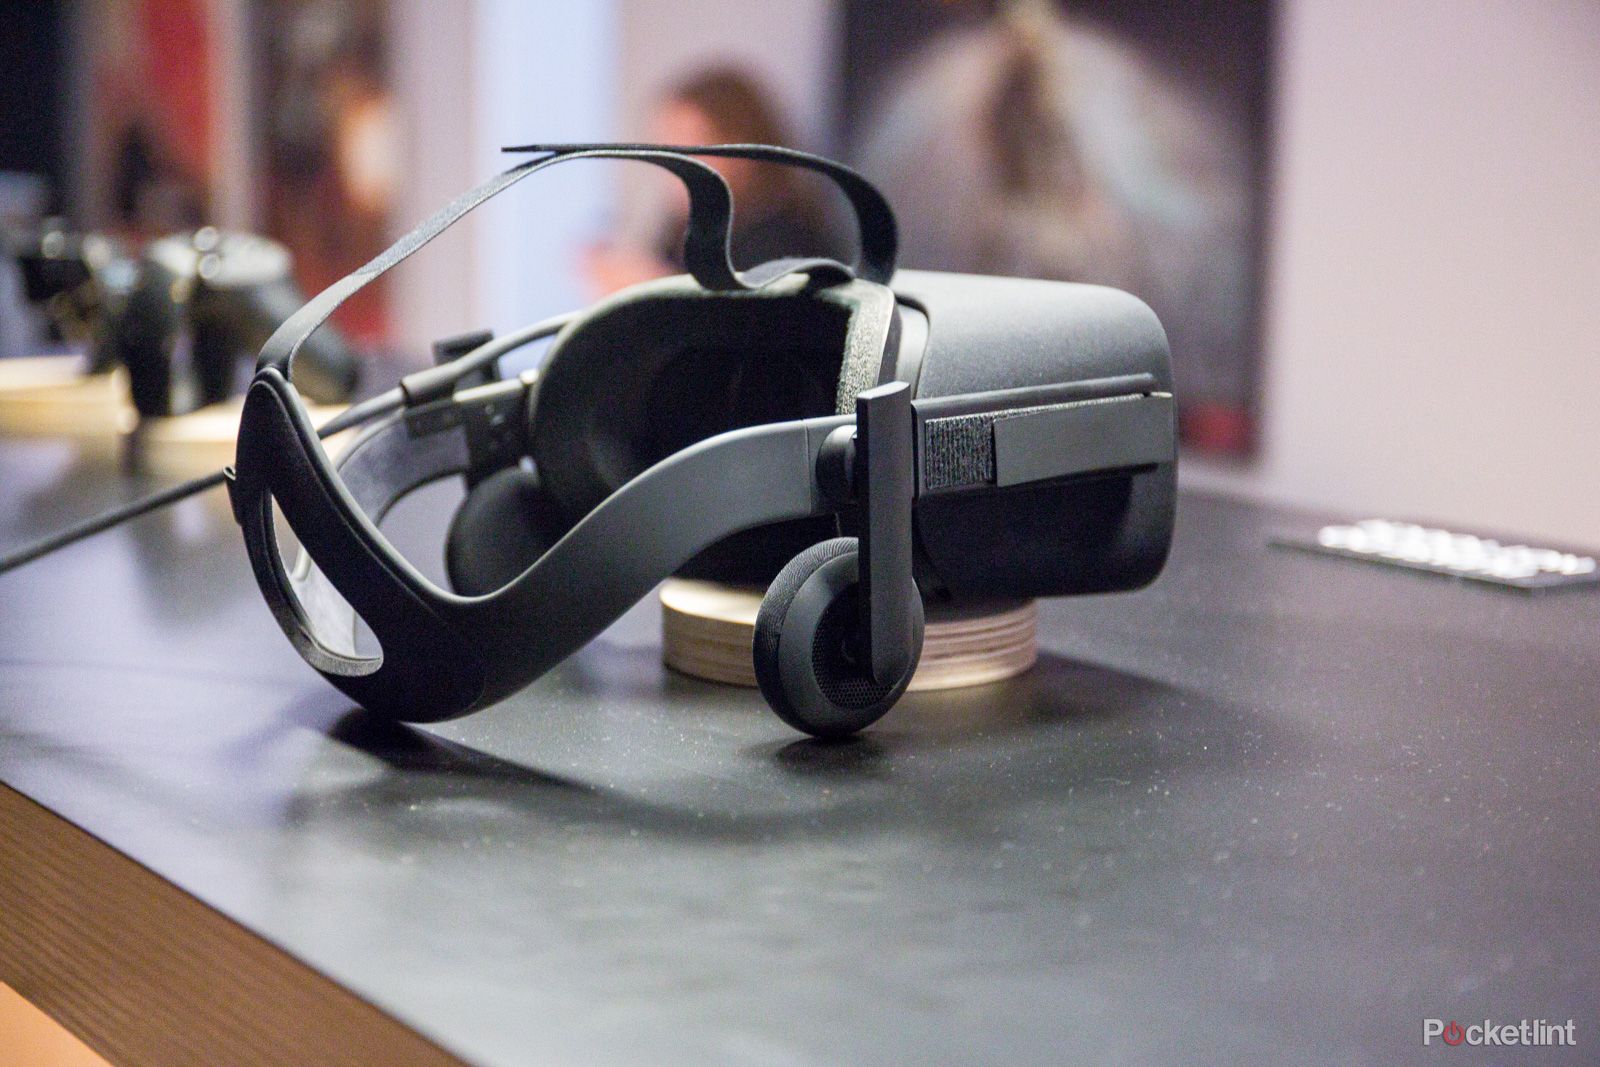 oculus rift hits shipping delays blaming component shortages image 1